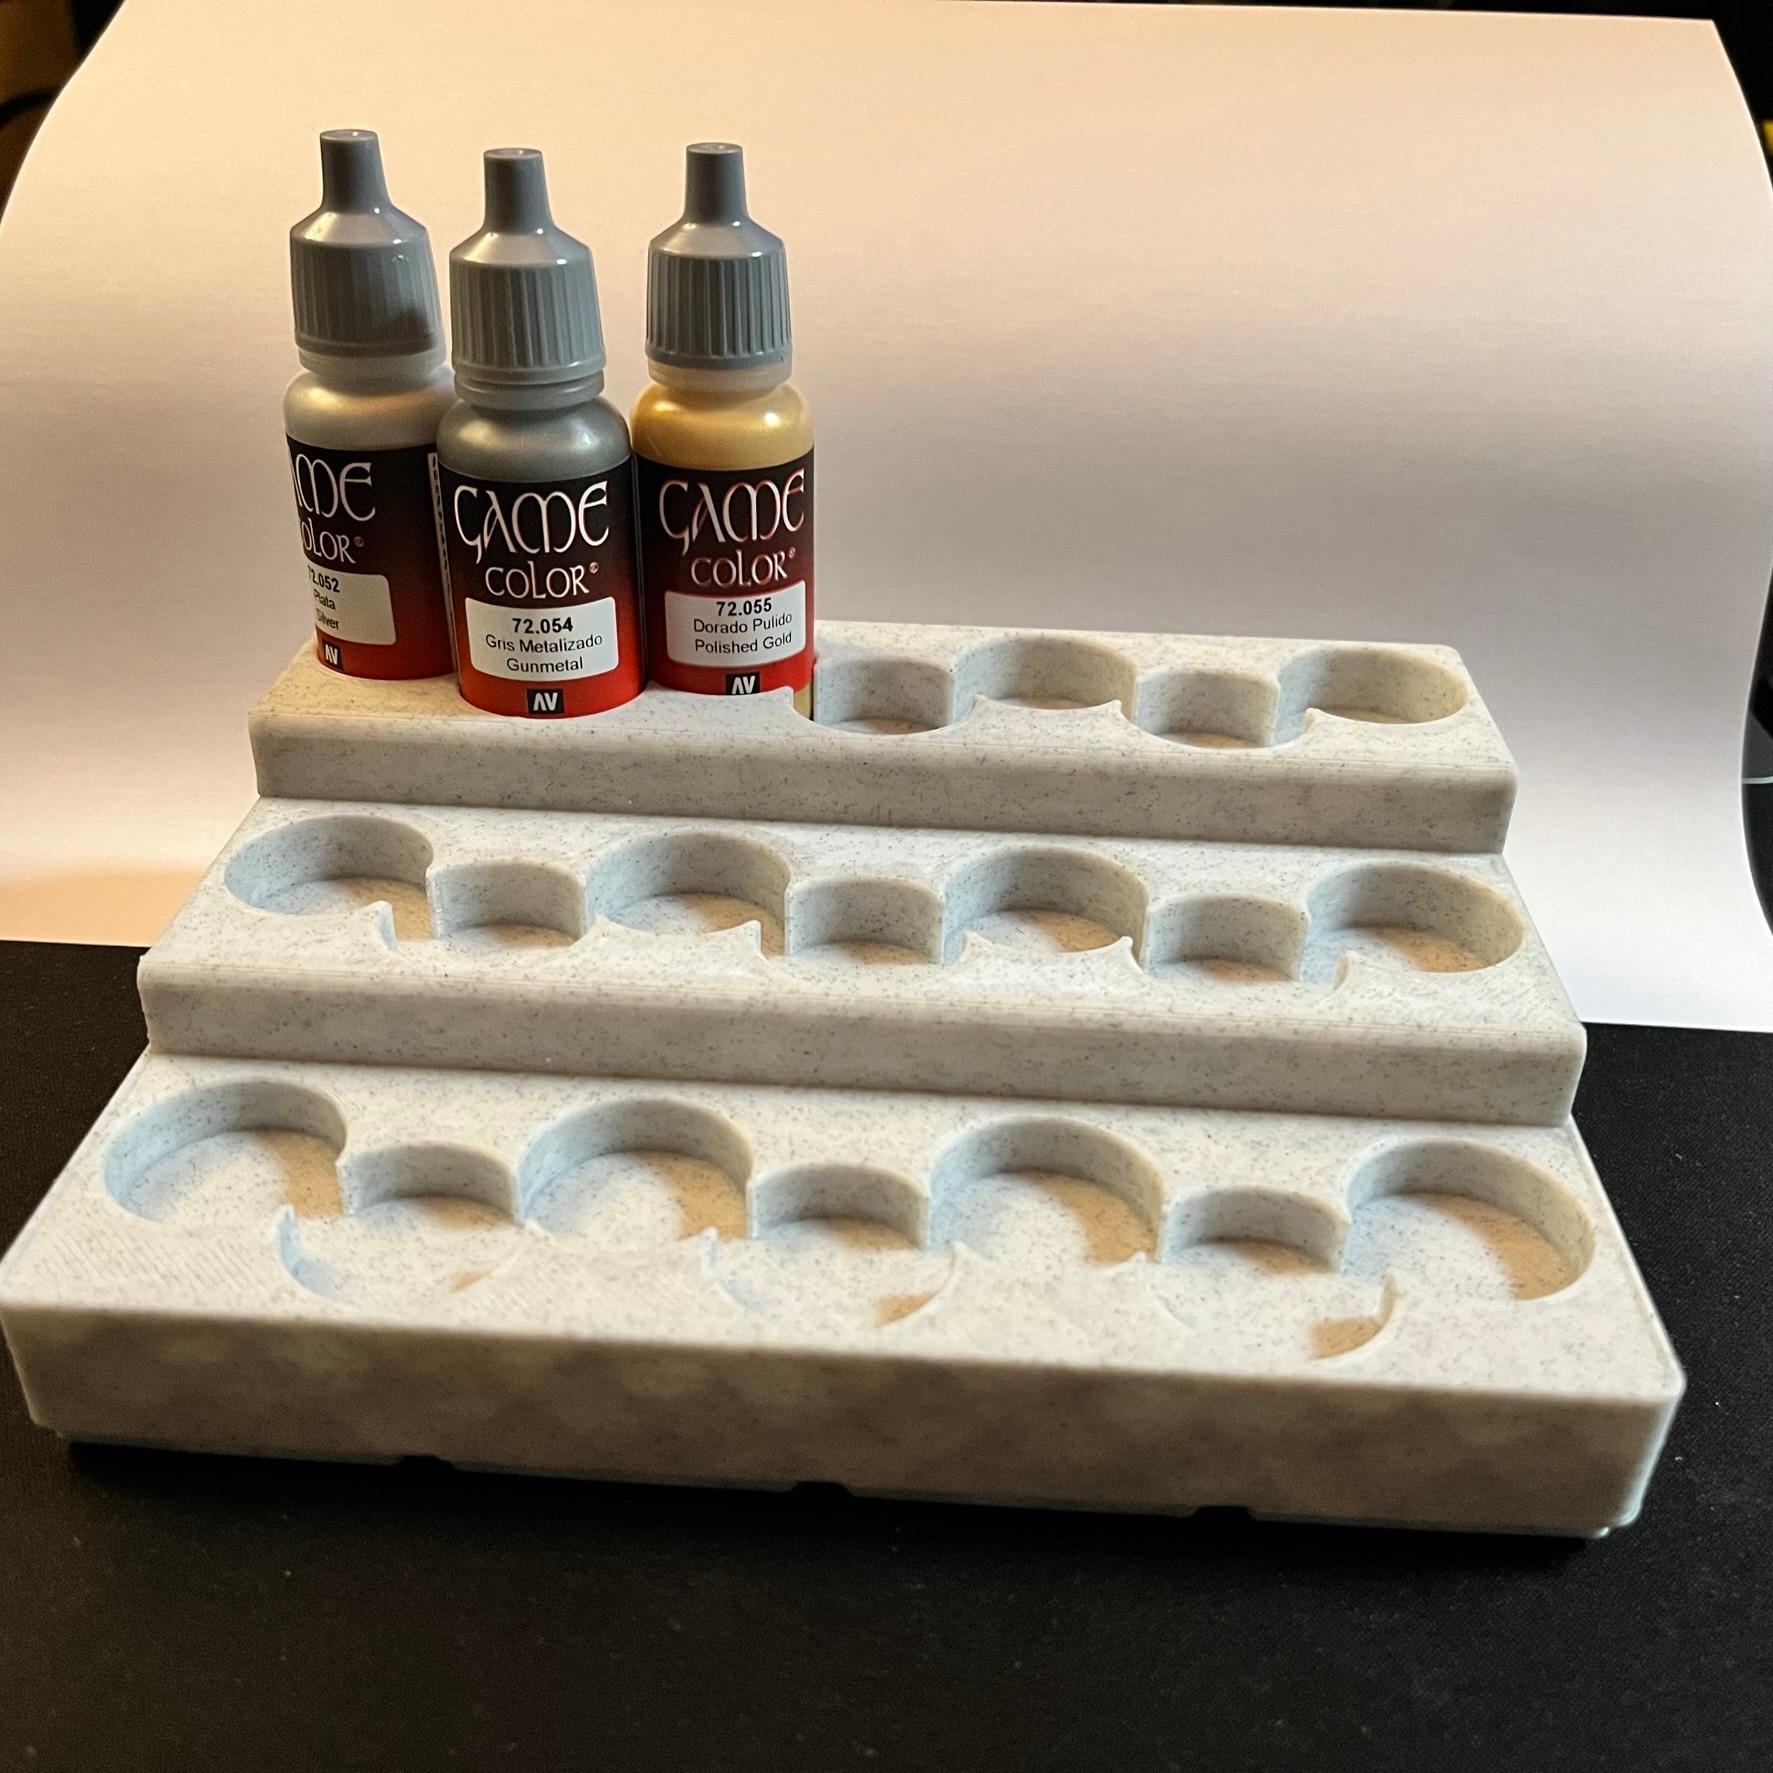 #Gridfinity Paint Shelf - Thank you! The bottles fit perfectly

9 hr 10 min print, with CHEP extra fast profile at 0.28 mm and 15% infill - 3d model